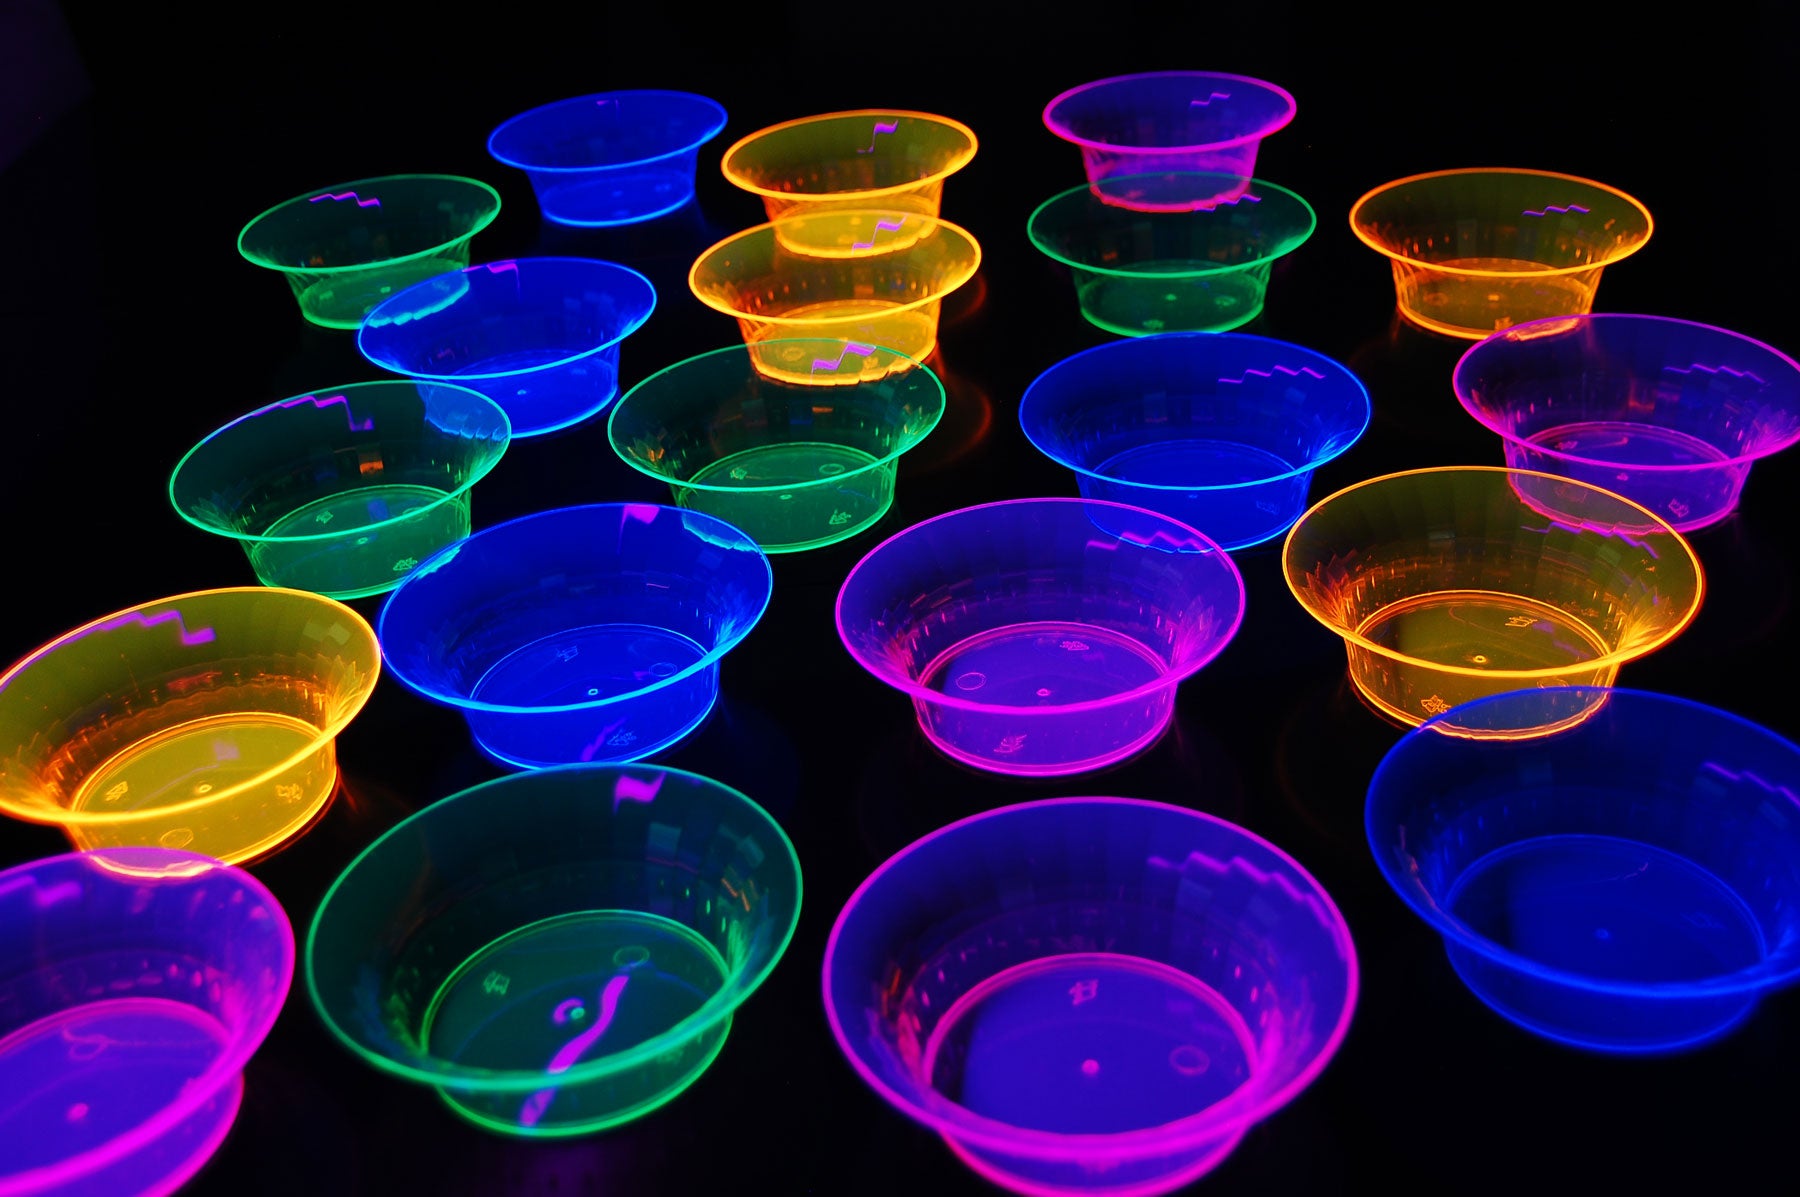 Glow-Bowls™ – Glow-in-the-Dark Combo Bowls